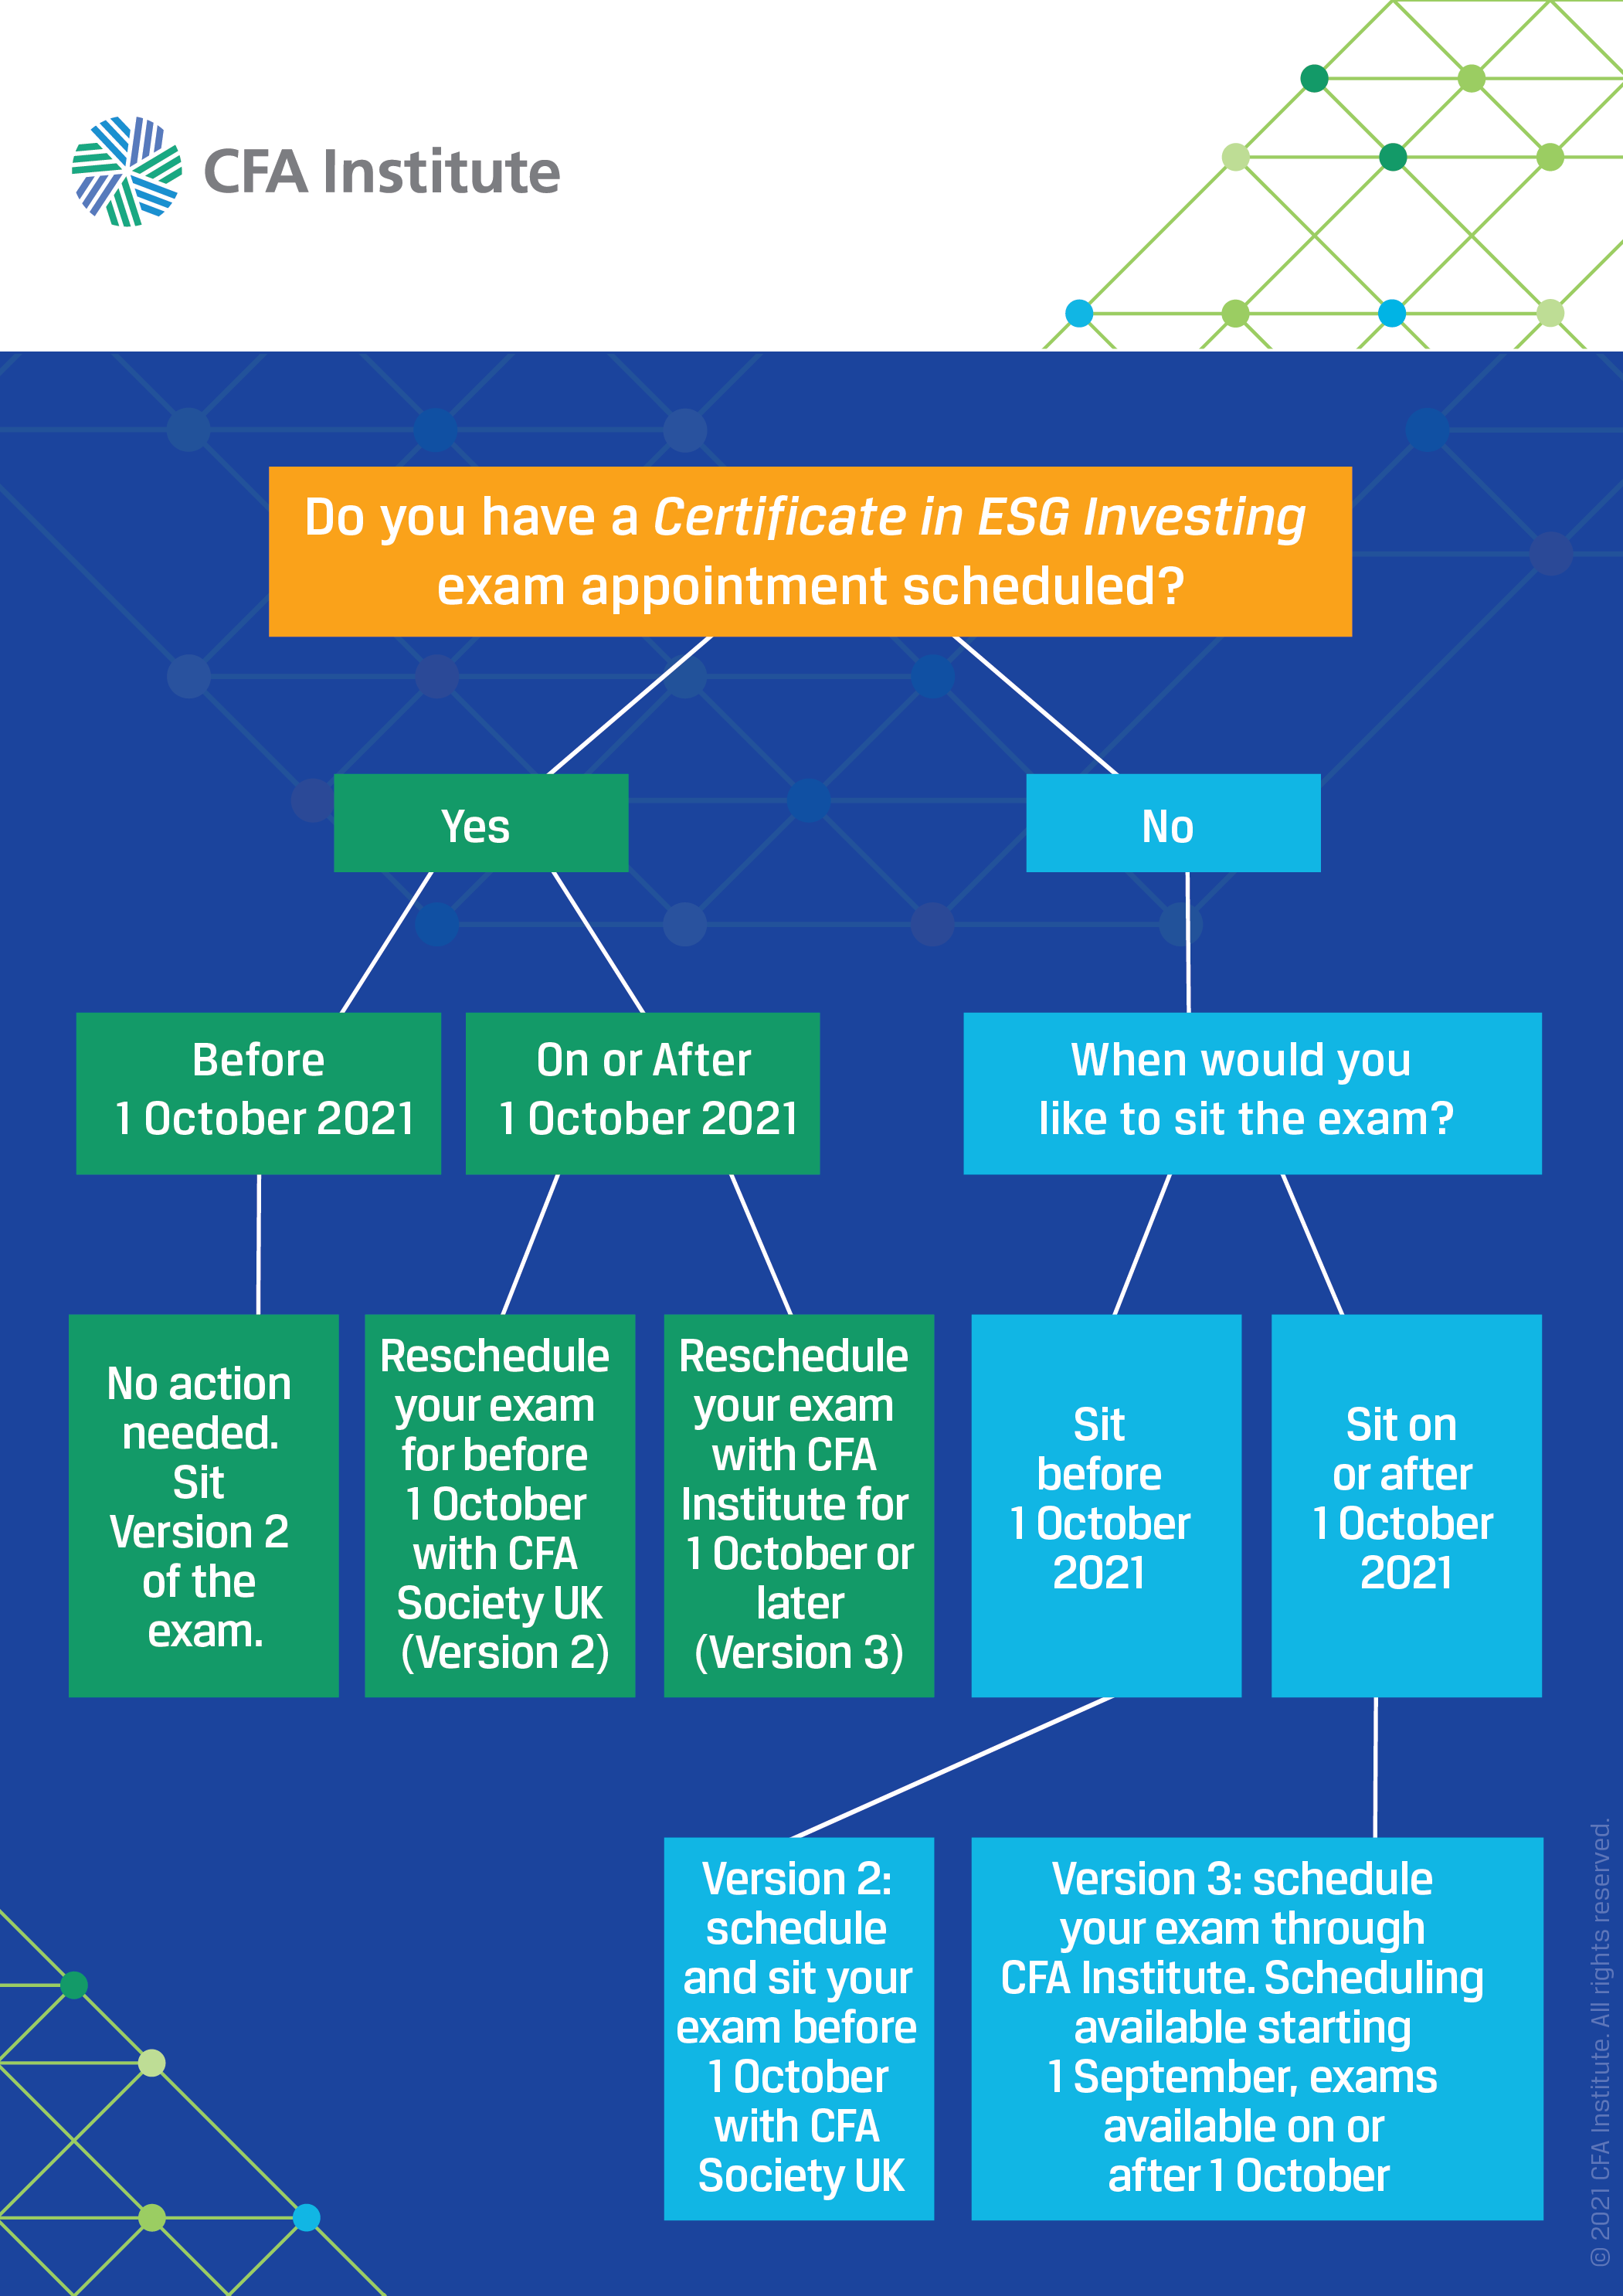 Decision making for when to take the Certificate in ESG Investing: Flow chart beginning with the question "Do you have an exam appointment scheduled?" If yes, and it is before 1 October 2021, No action is needed. You will sit for Version 2 of the exam. If yes and it is scheduled on or after 1 October 2021, you can either reschedule your exam for before 1 October with CFA Society UK (Version 2) or reschedule your exam with CFA Institute after 1 October (Version 3). If you have not scheduled your exam appointment yet, you should decide whether you want to sit prior to 1 October 2021 (Version 2), in which case you may schedule with CFA Society UK, or if you wish to sit on or after 1 October 2021 (Version 3), in which case you should schedule through CFA Institute beginning 1 September (with exams available on or after 1 October).